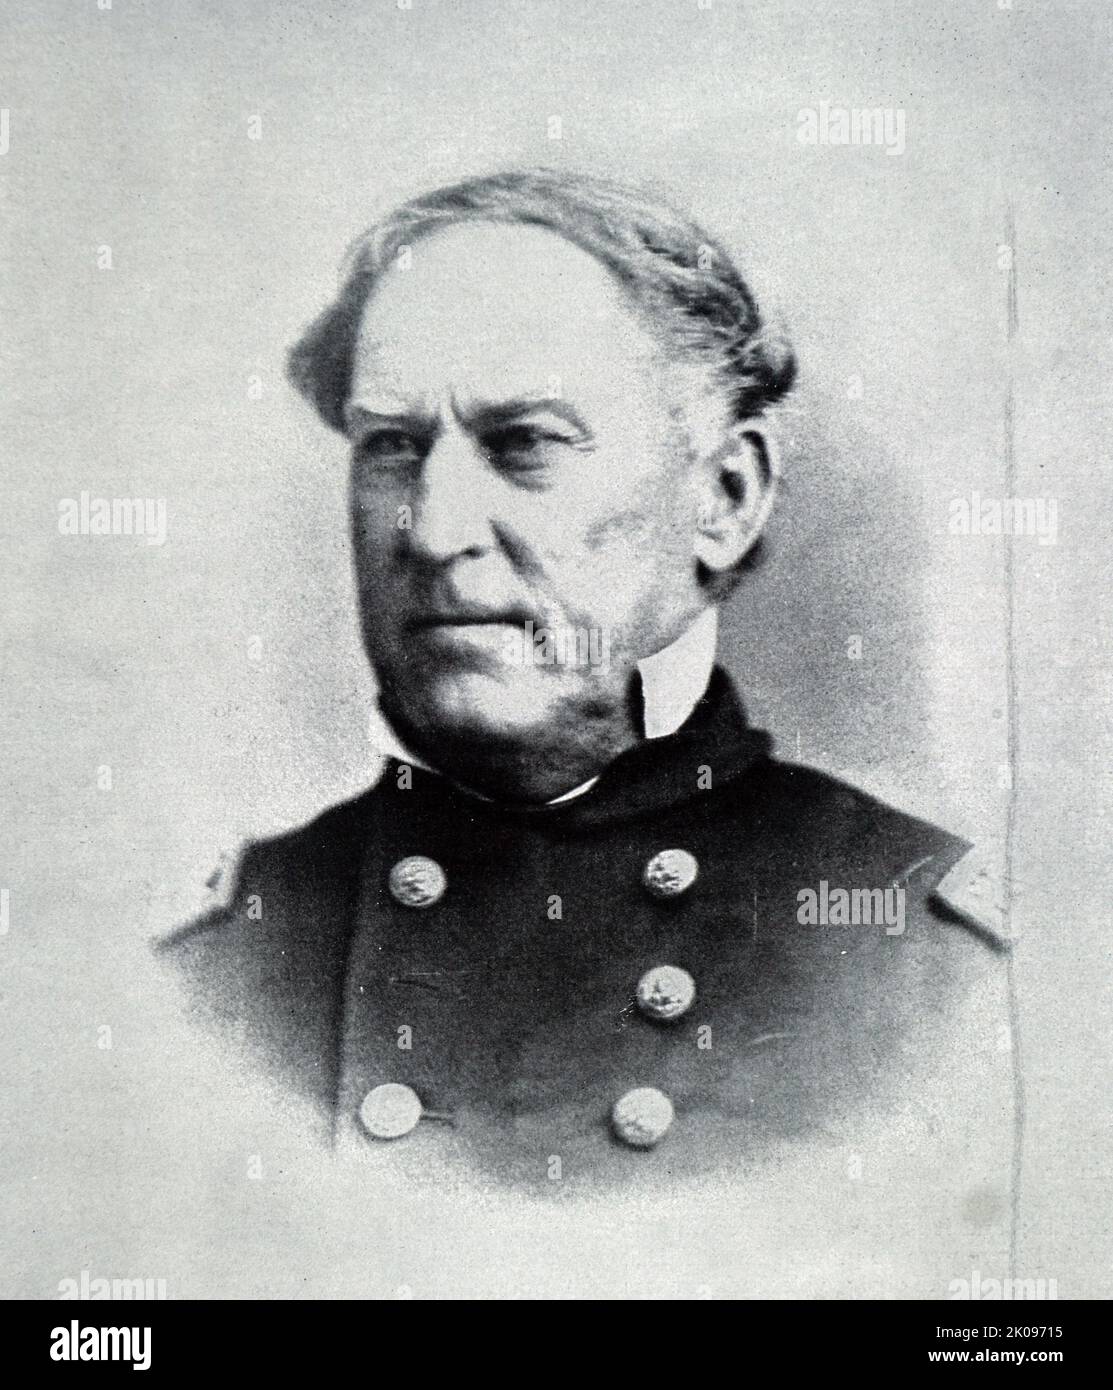 Admiral David Farragut. David Glasgow Farragut (July 5, 1801 - August 14, 1870) was a flag officer of the United States Navy during the American Civil War. Stock Photo